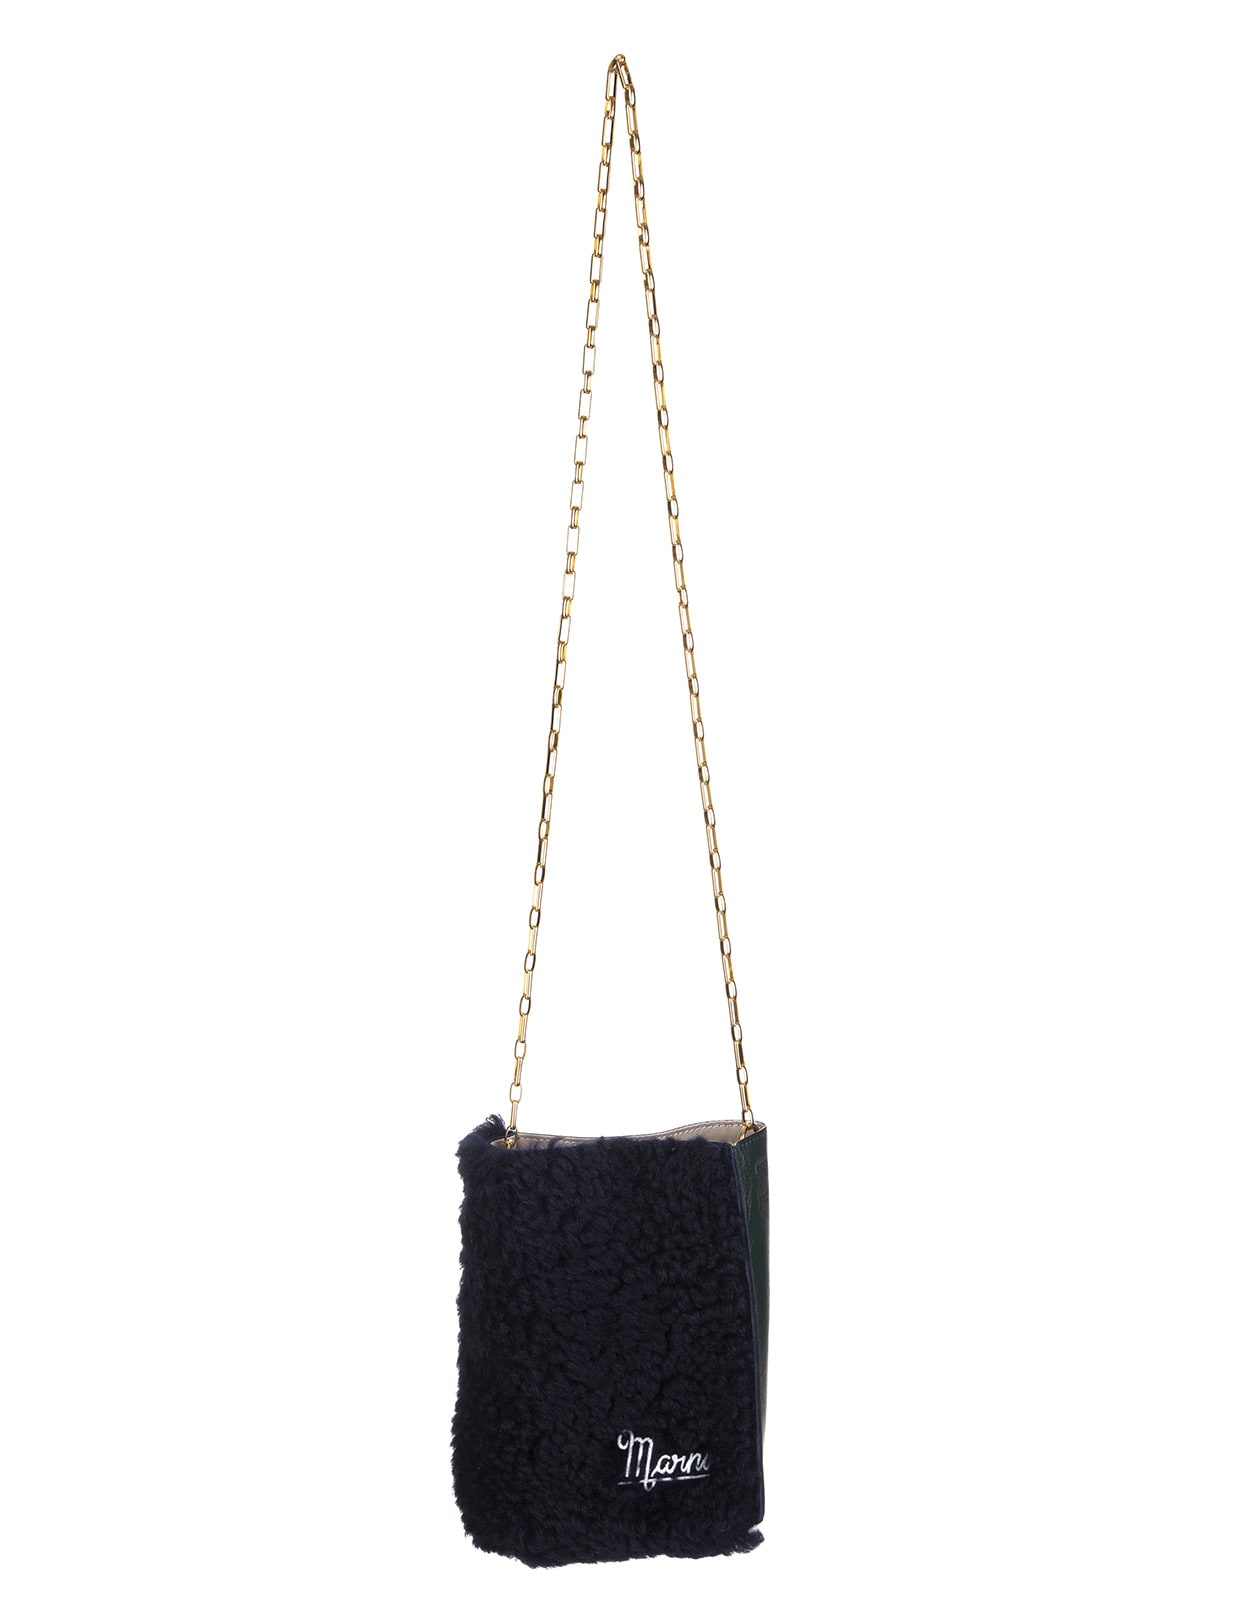 Marni Black And Dark Green Mini Bag In Shearling And Leather With Golden Chain